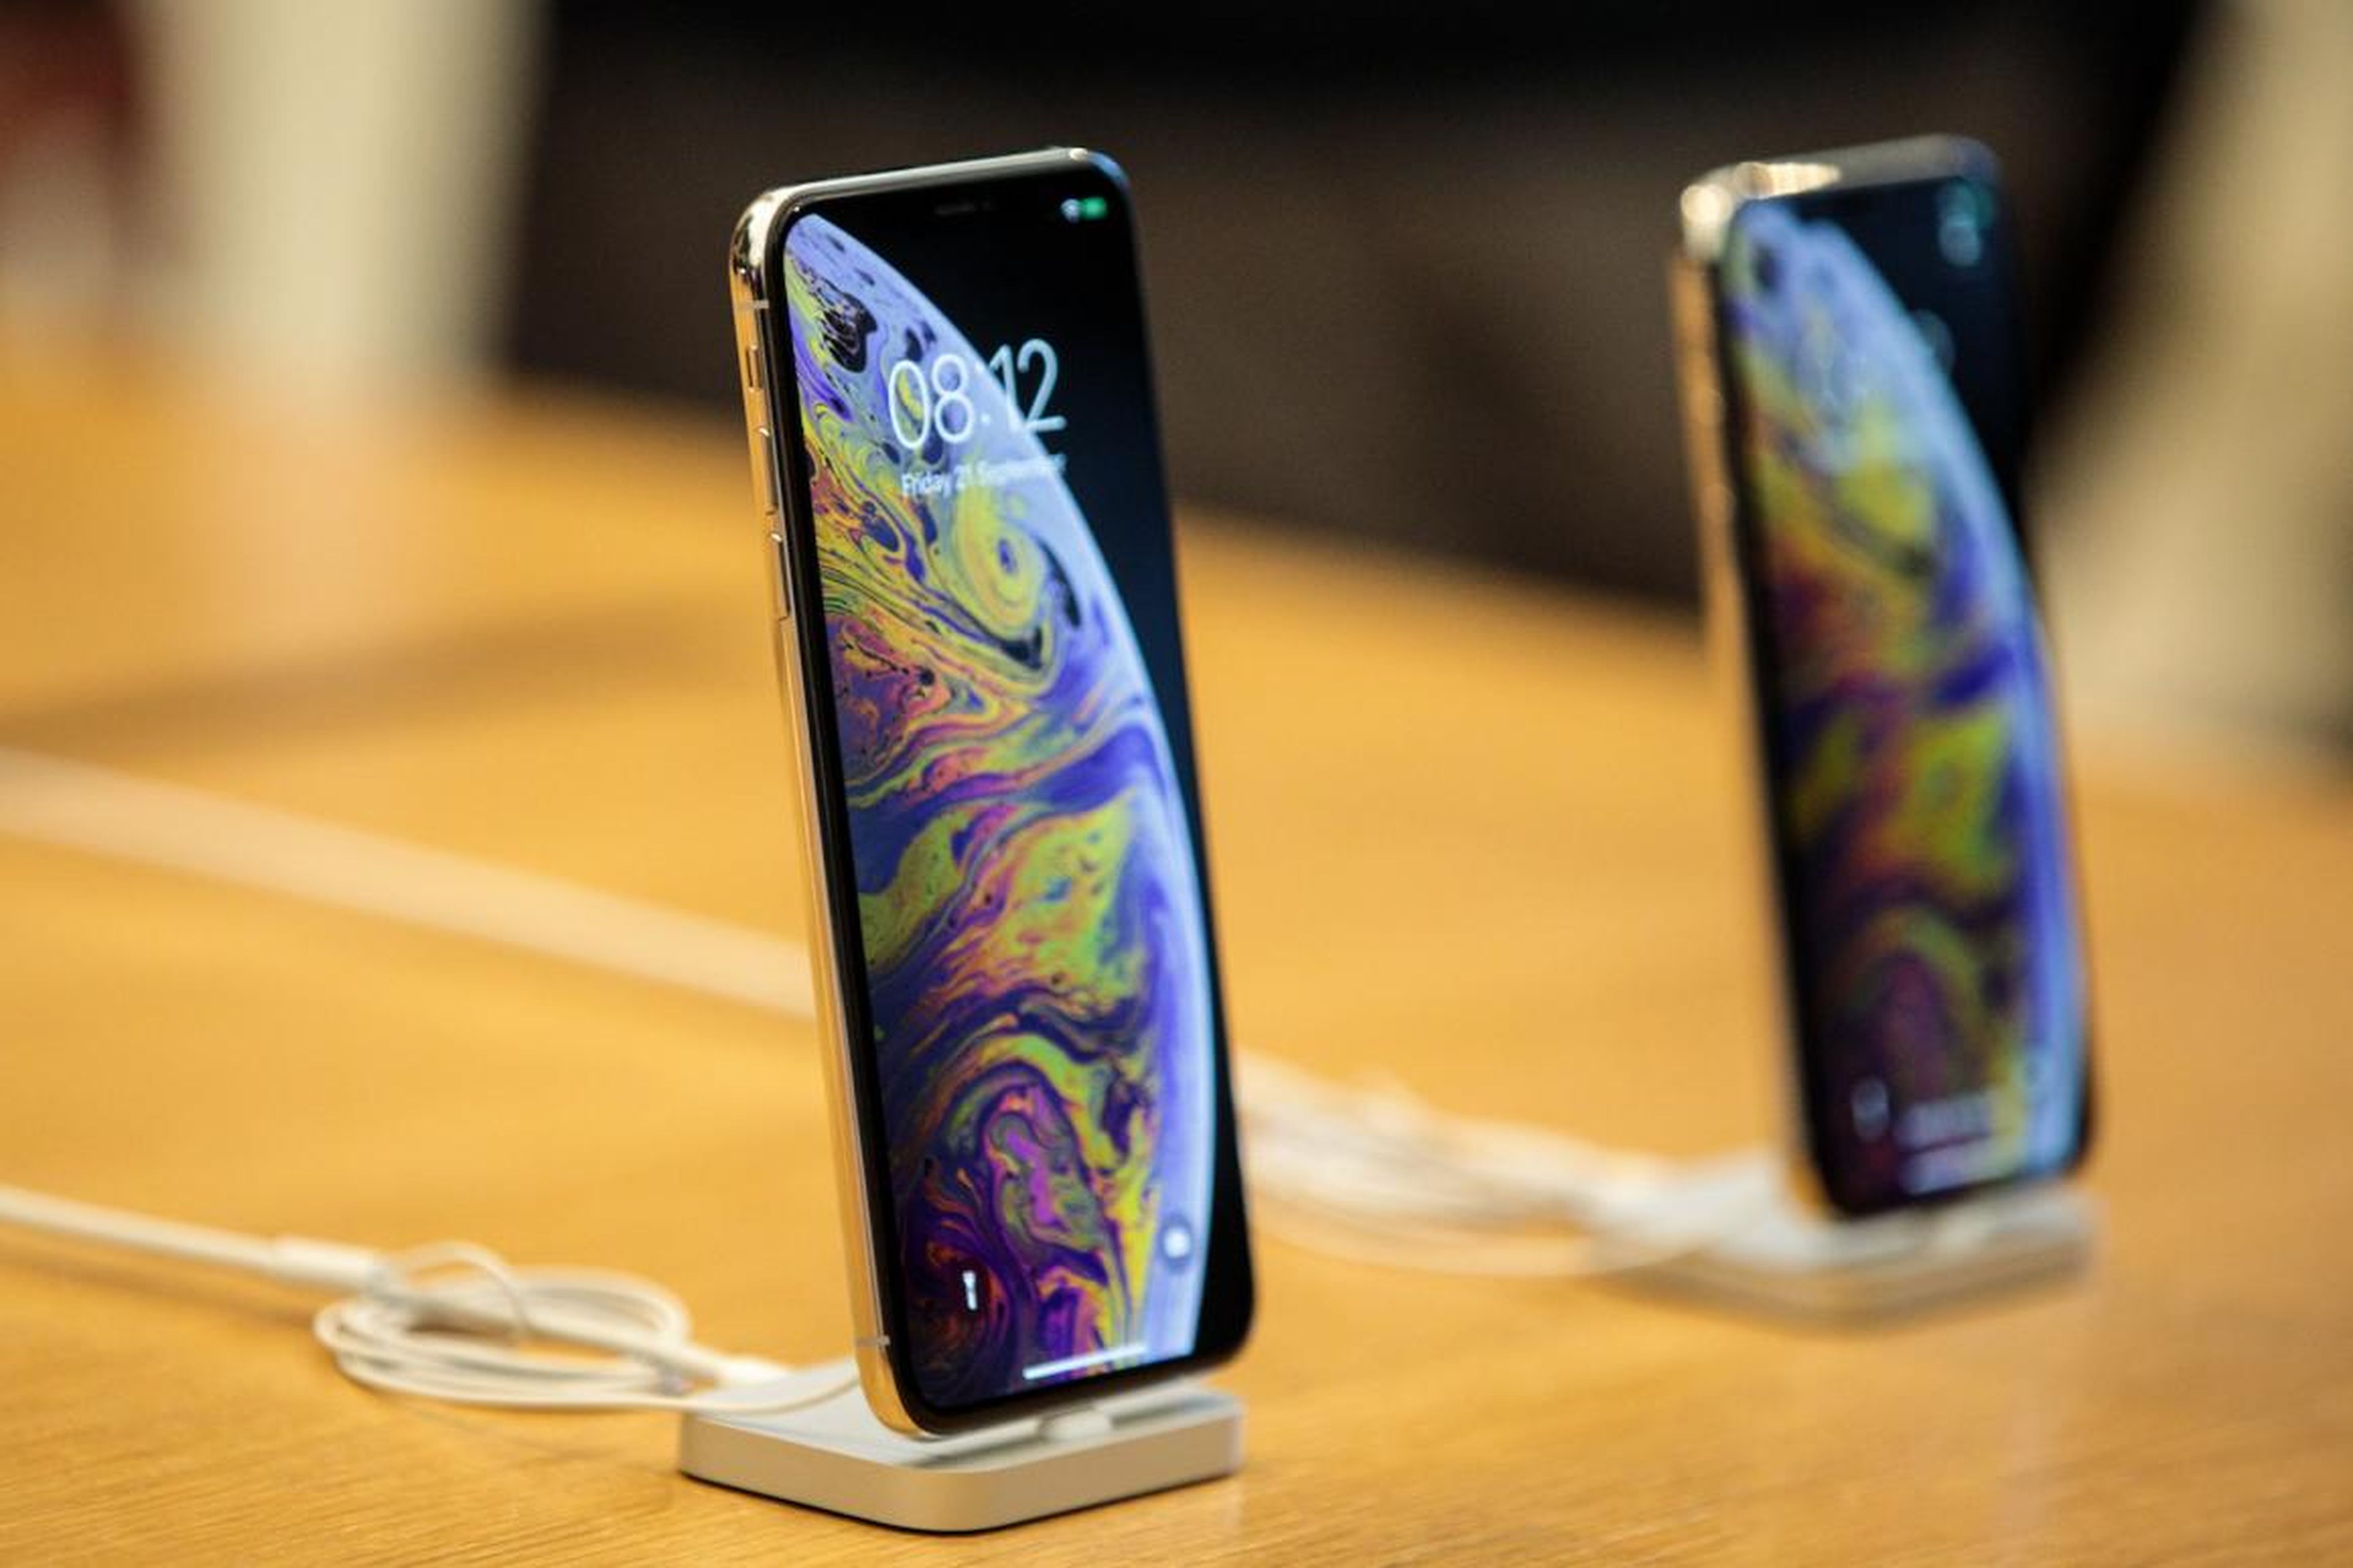 The iPhone XS and XS Max support up to 512 GB of internal storage. The iPhone XR only supports up to 256 GB of storage.